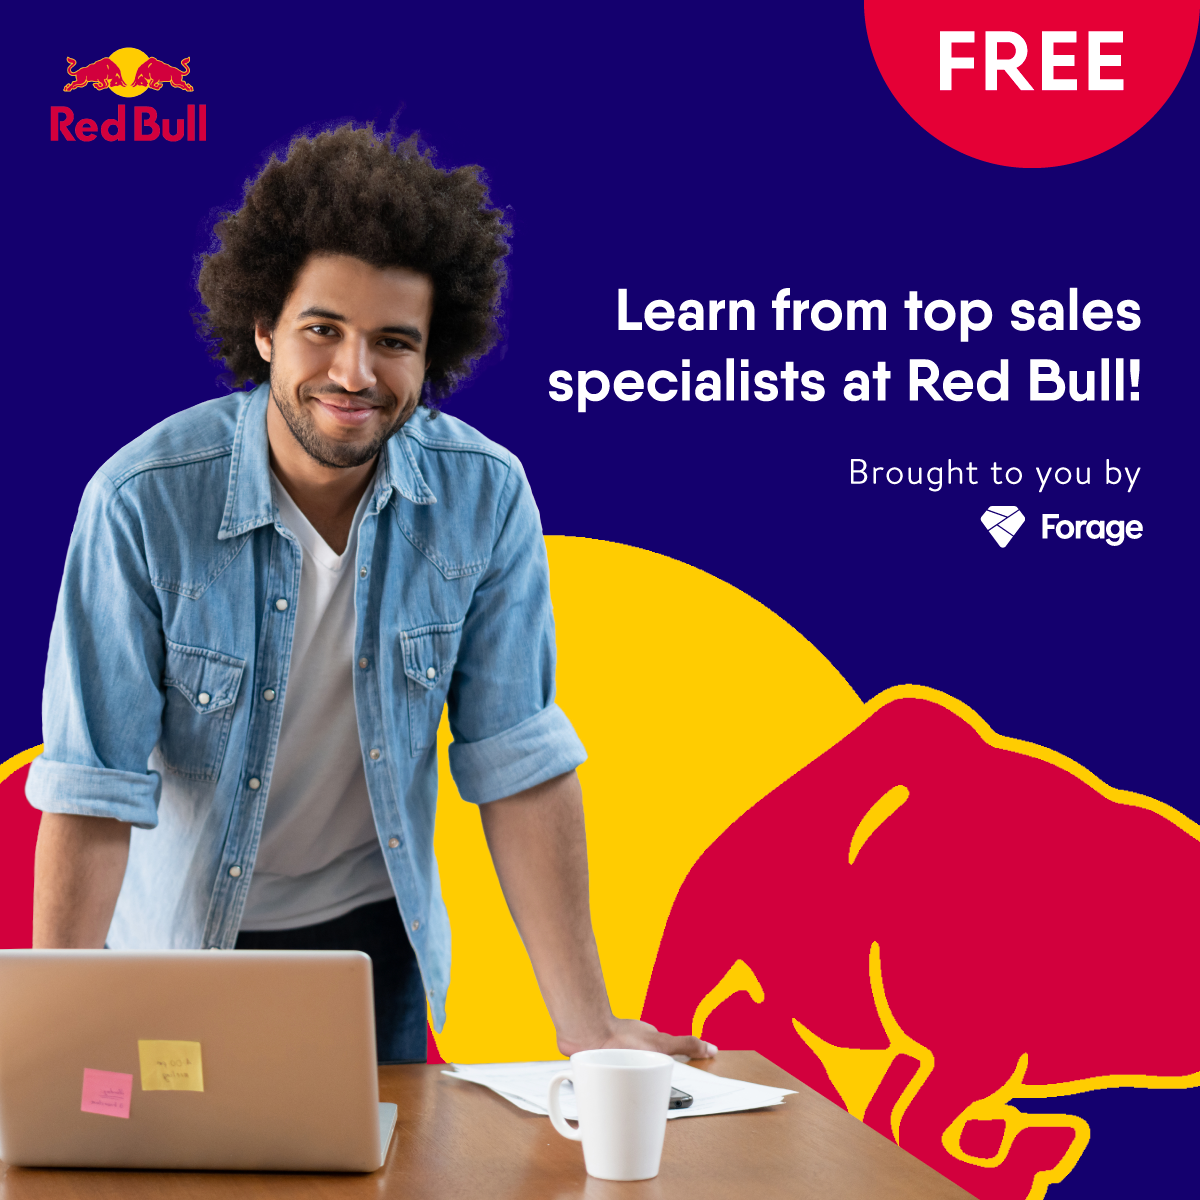 FOR_020322_Redbull_FB_Ad_Images_1200x1200_2A.png